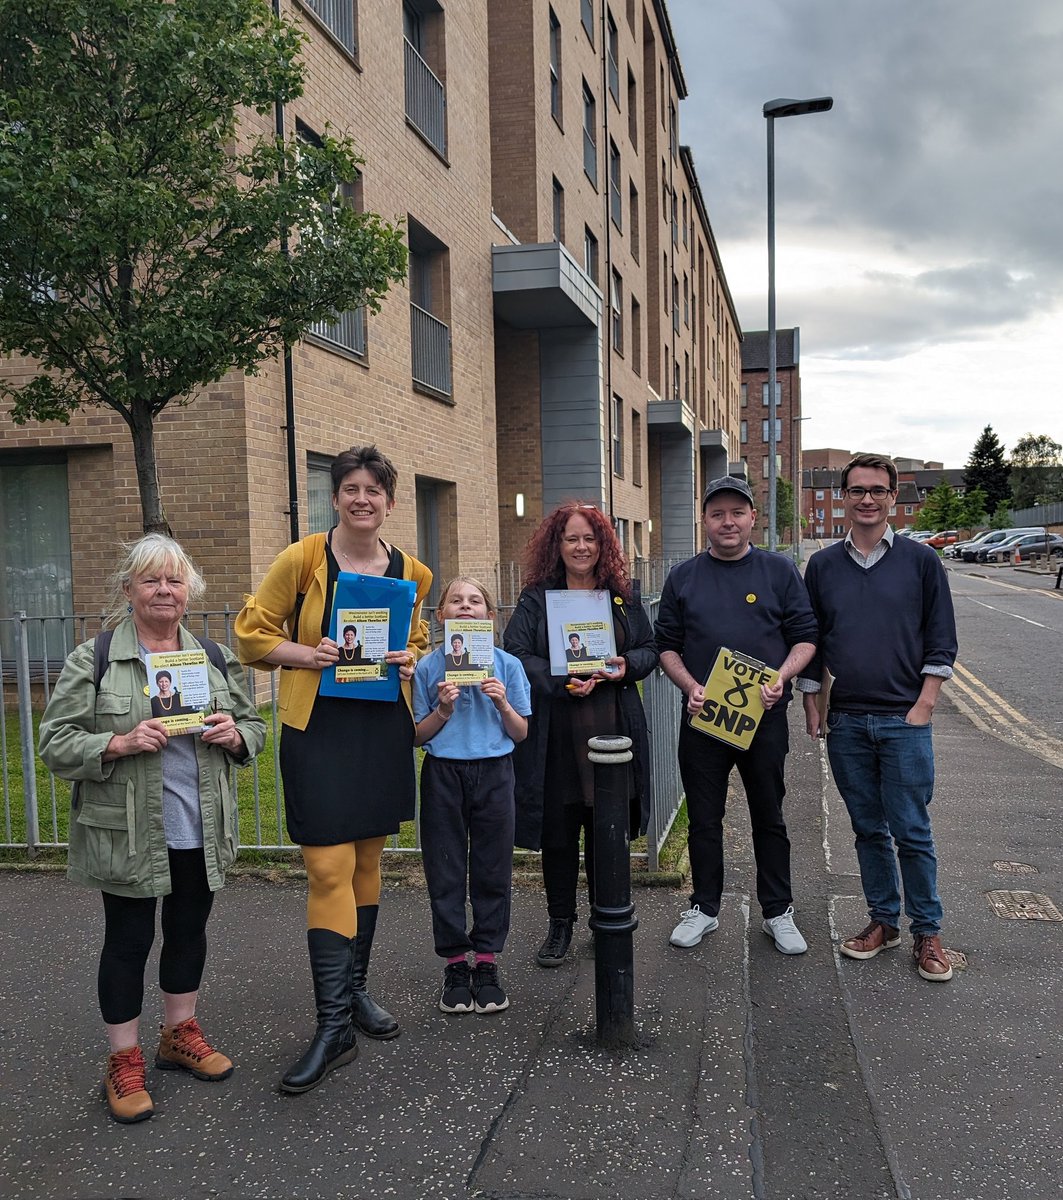 💛 A good @theSNP campaign session out in Anderston this evening! #ActiveSNP #VoteSNP #GE24